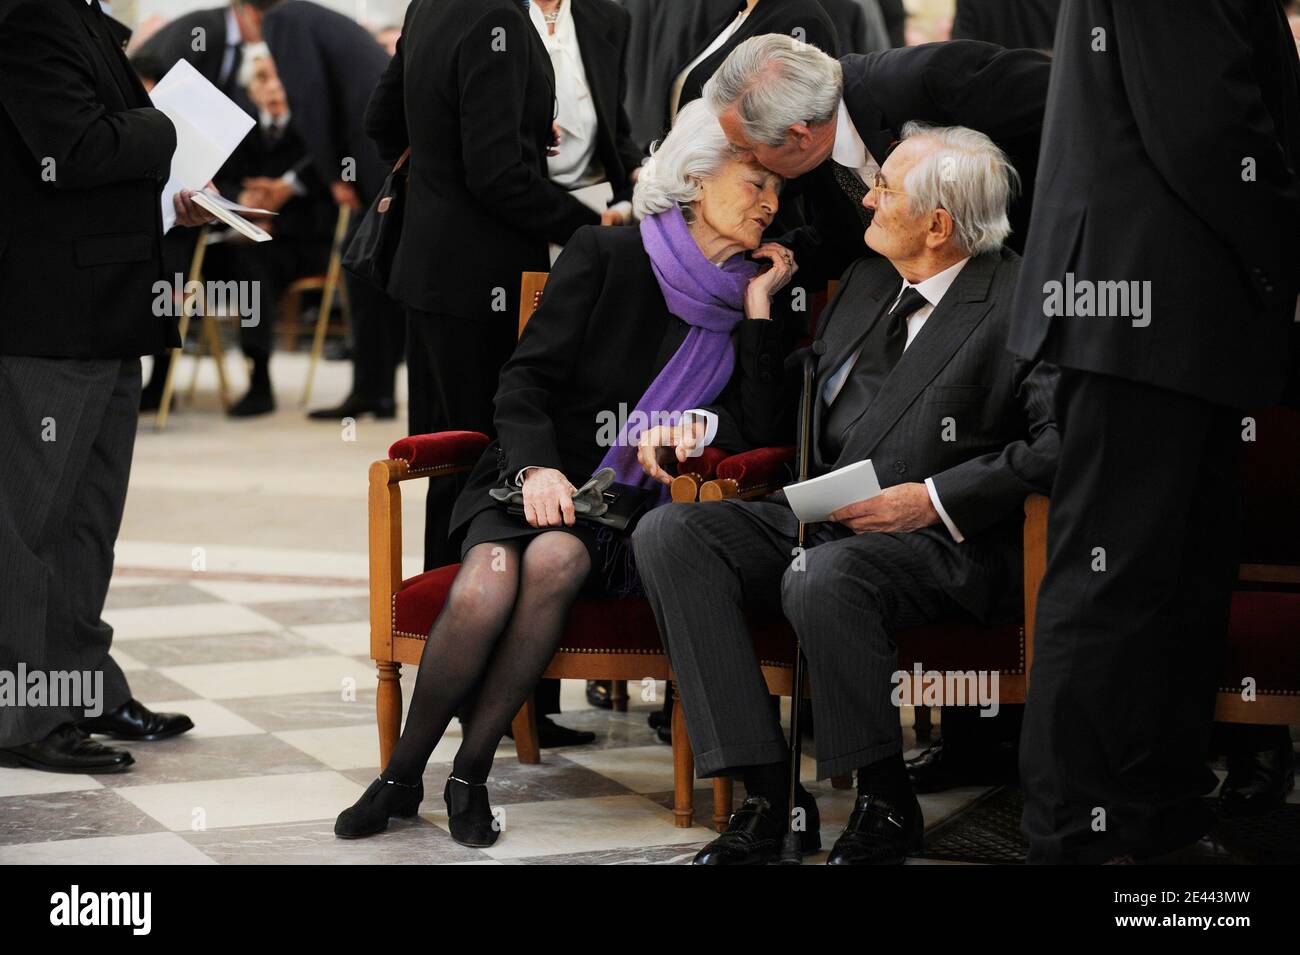 Maurice Druon's widow Madeleine Druon during funeral ceremony of Maurice  Druon at Saint-Louis des Invalides Church in Paris, France, on April 20,  2009. France honored French Academy permanent secretary, former minister and